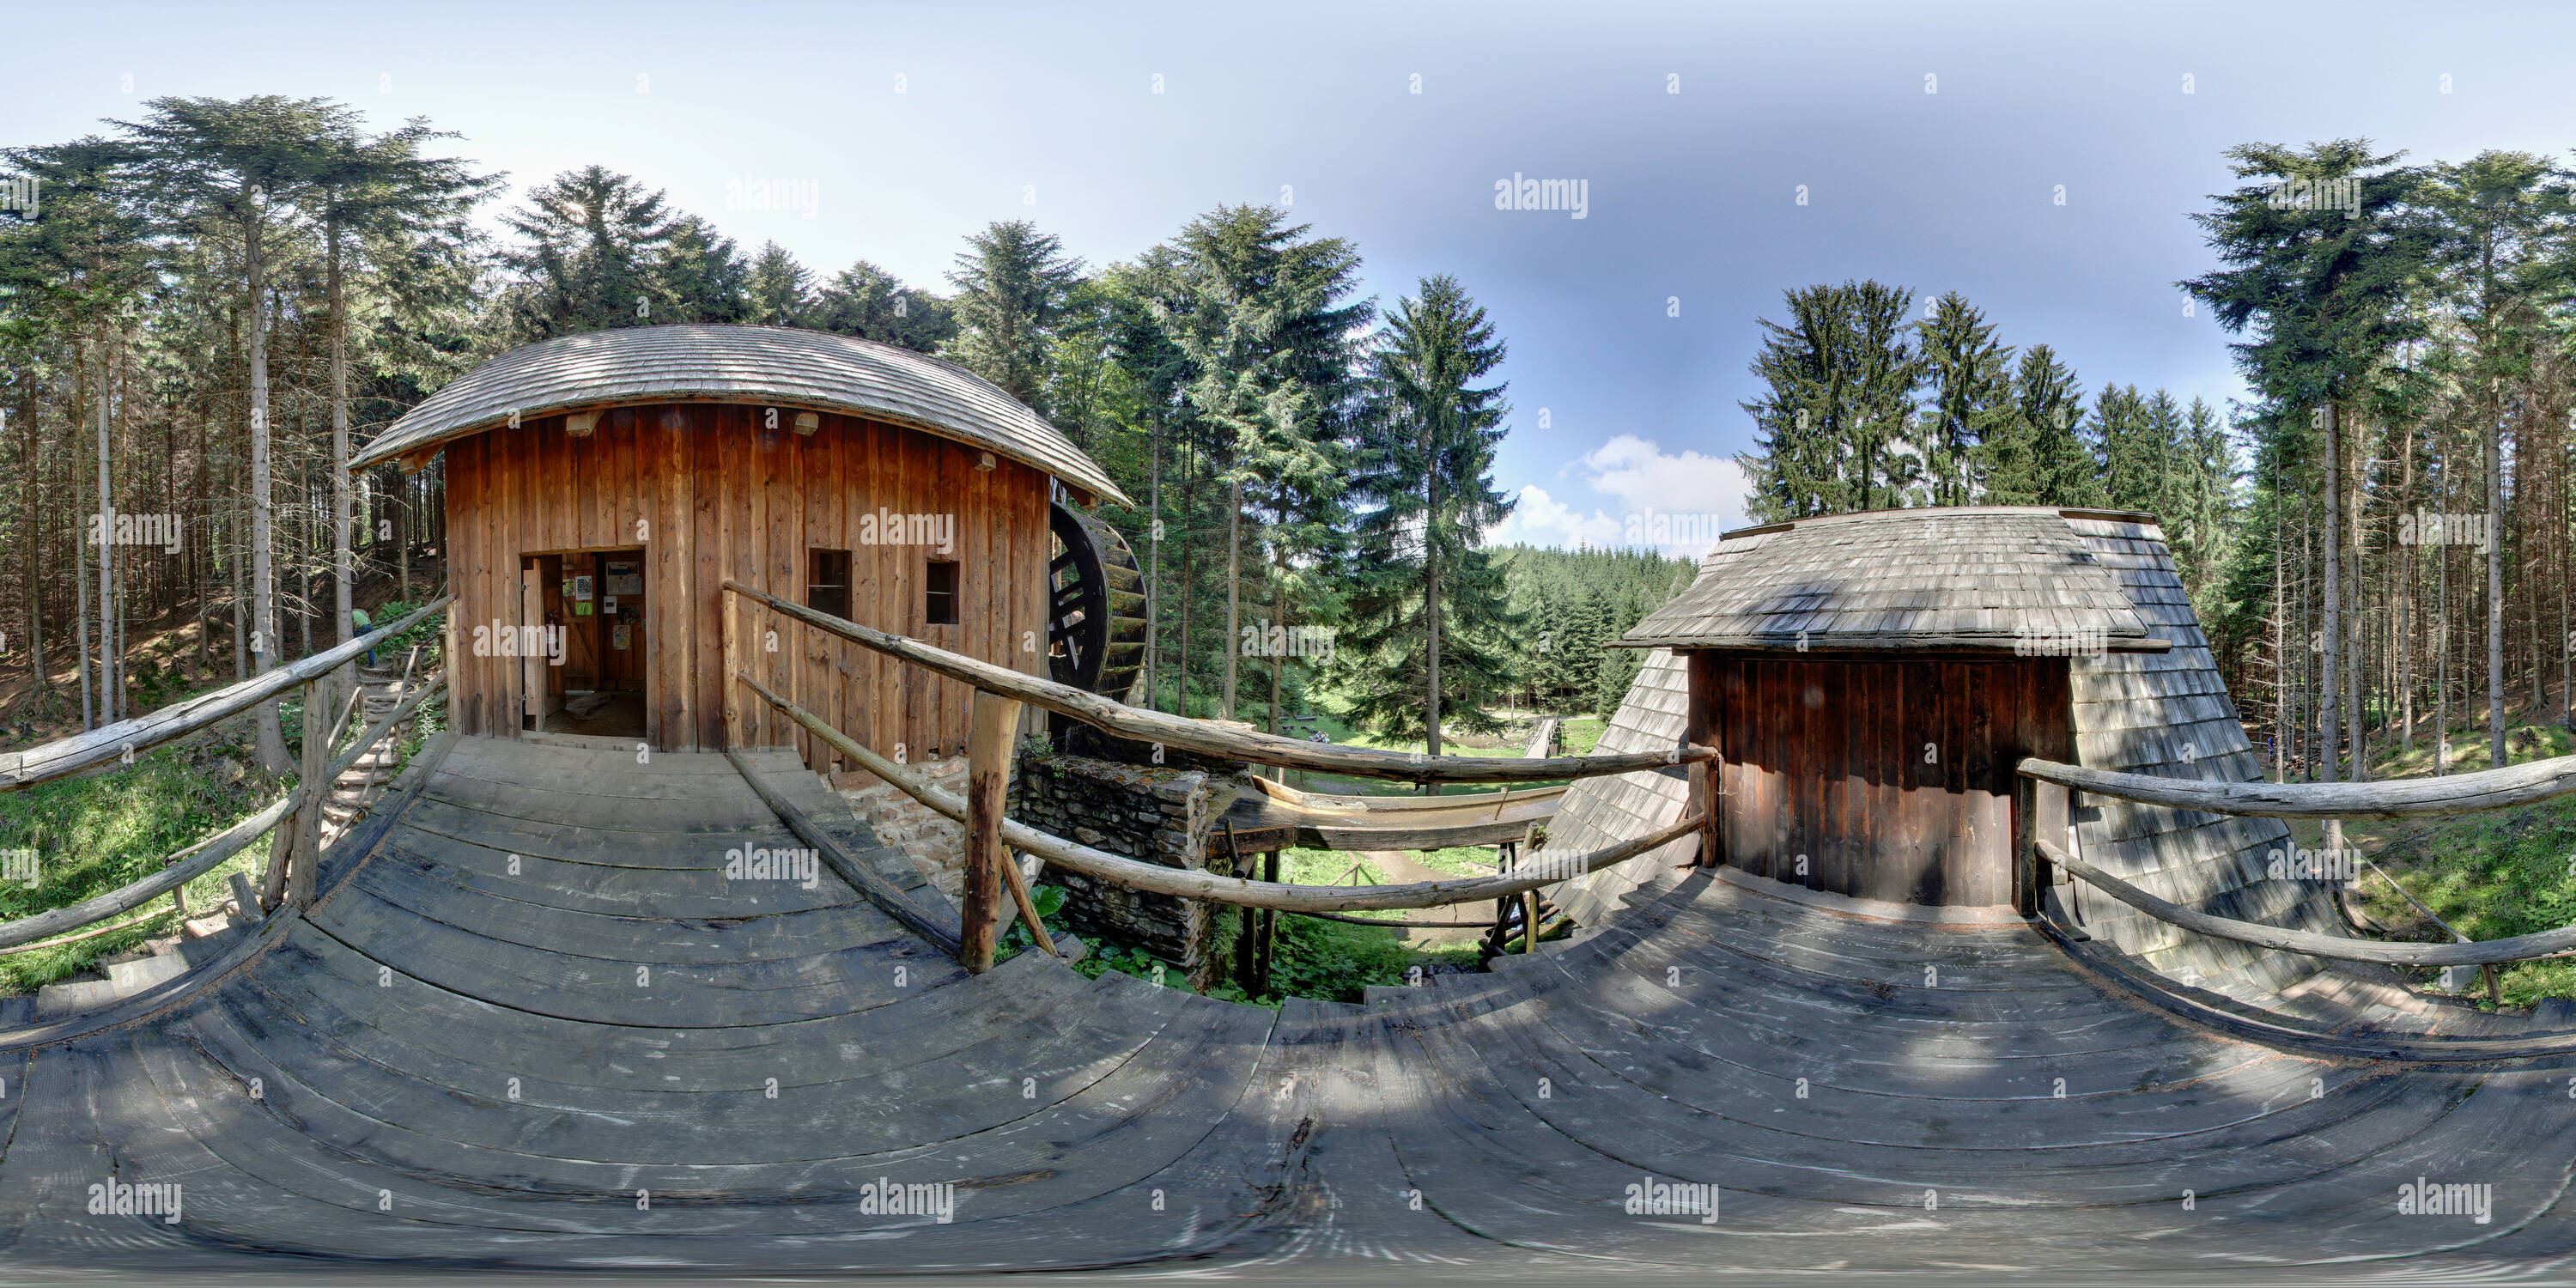 360 degree panoramic view of Zlaté Hory, Gold mines